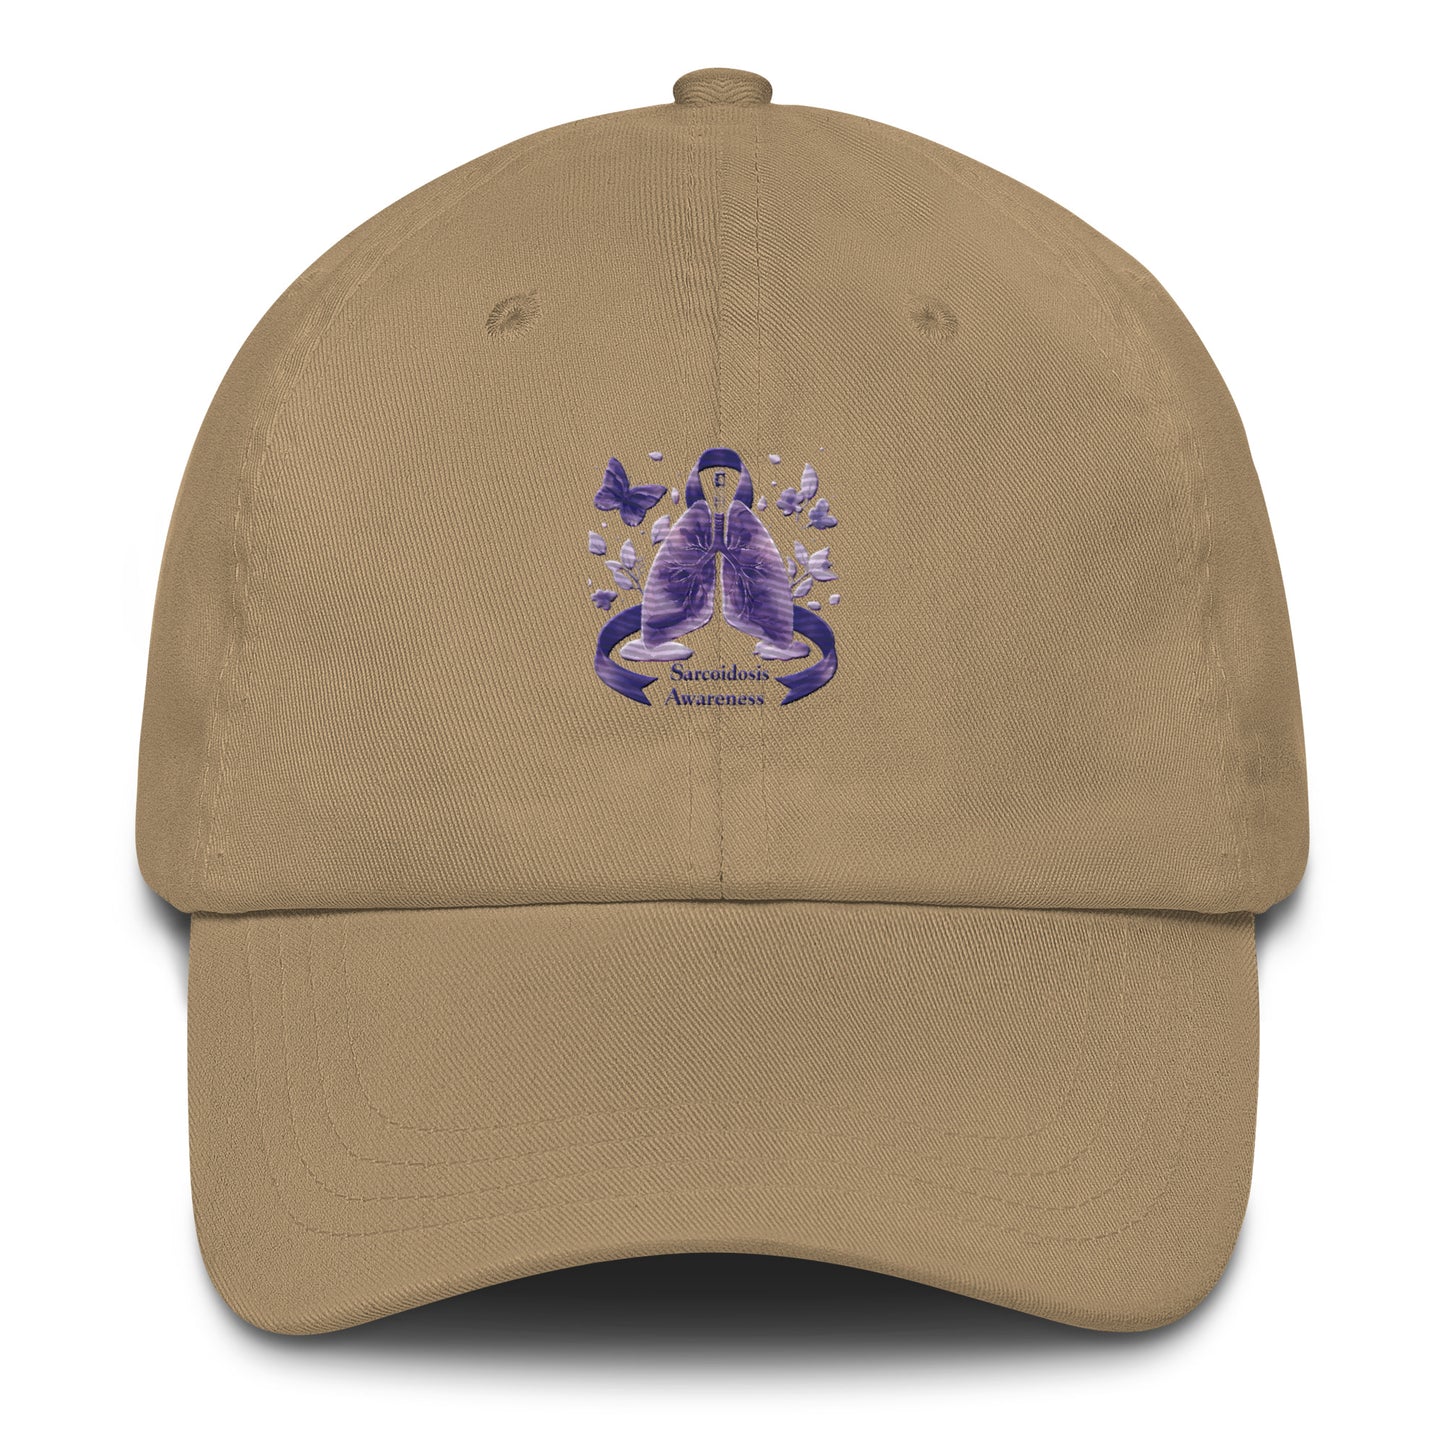 I Sport Purple For Sarcoidosis Awareness Butterfly Hope Dad Cap